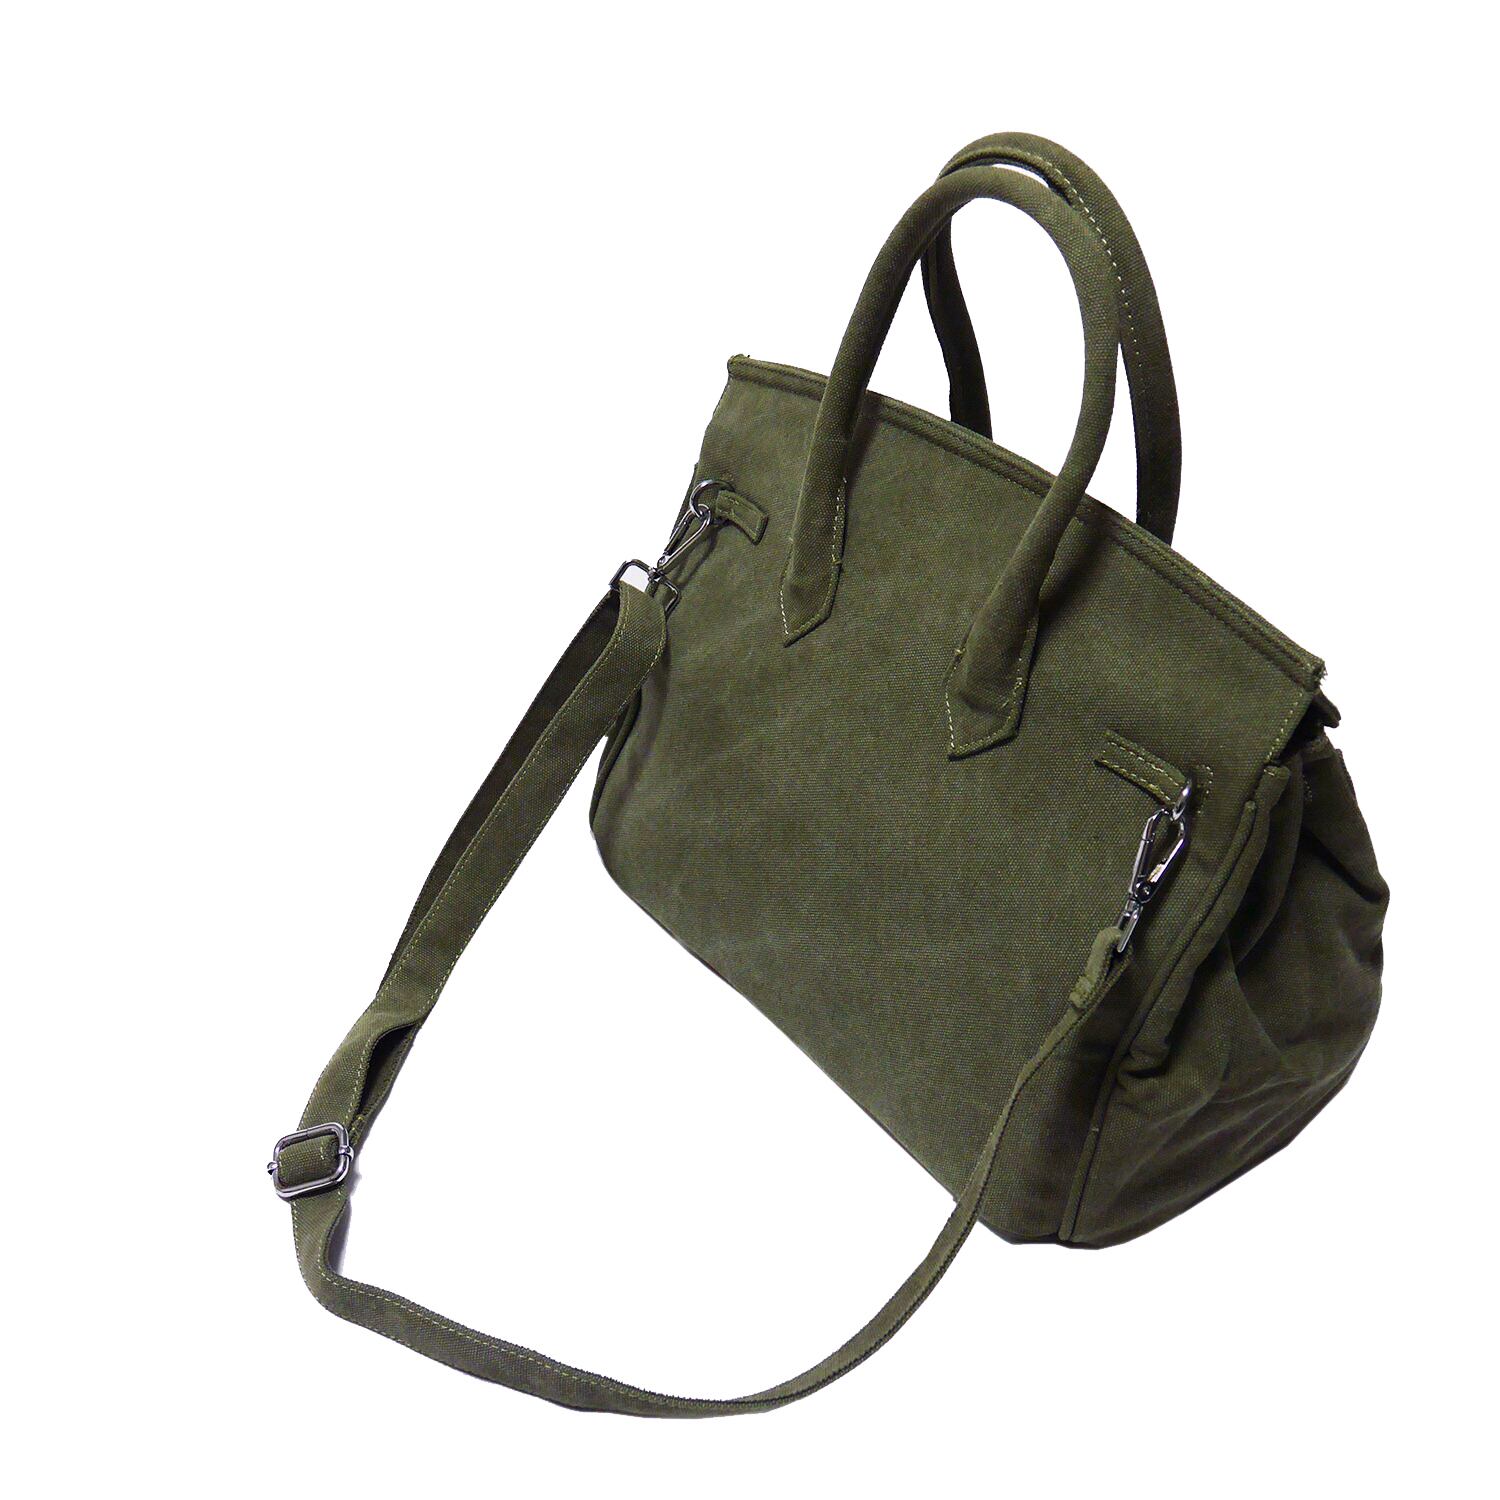 REMAKE 2WAY BAG -MILITARY OLIVE- | THE CONTRARIAN